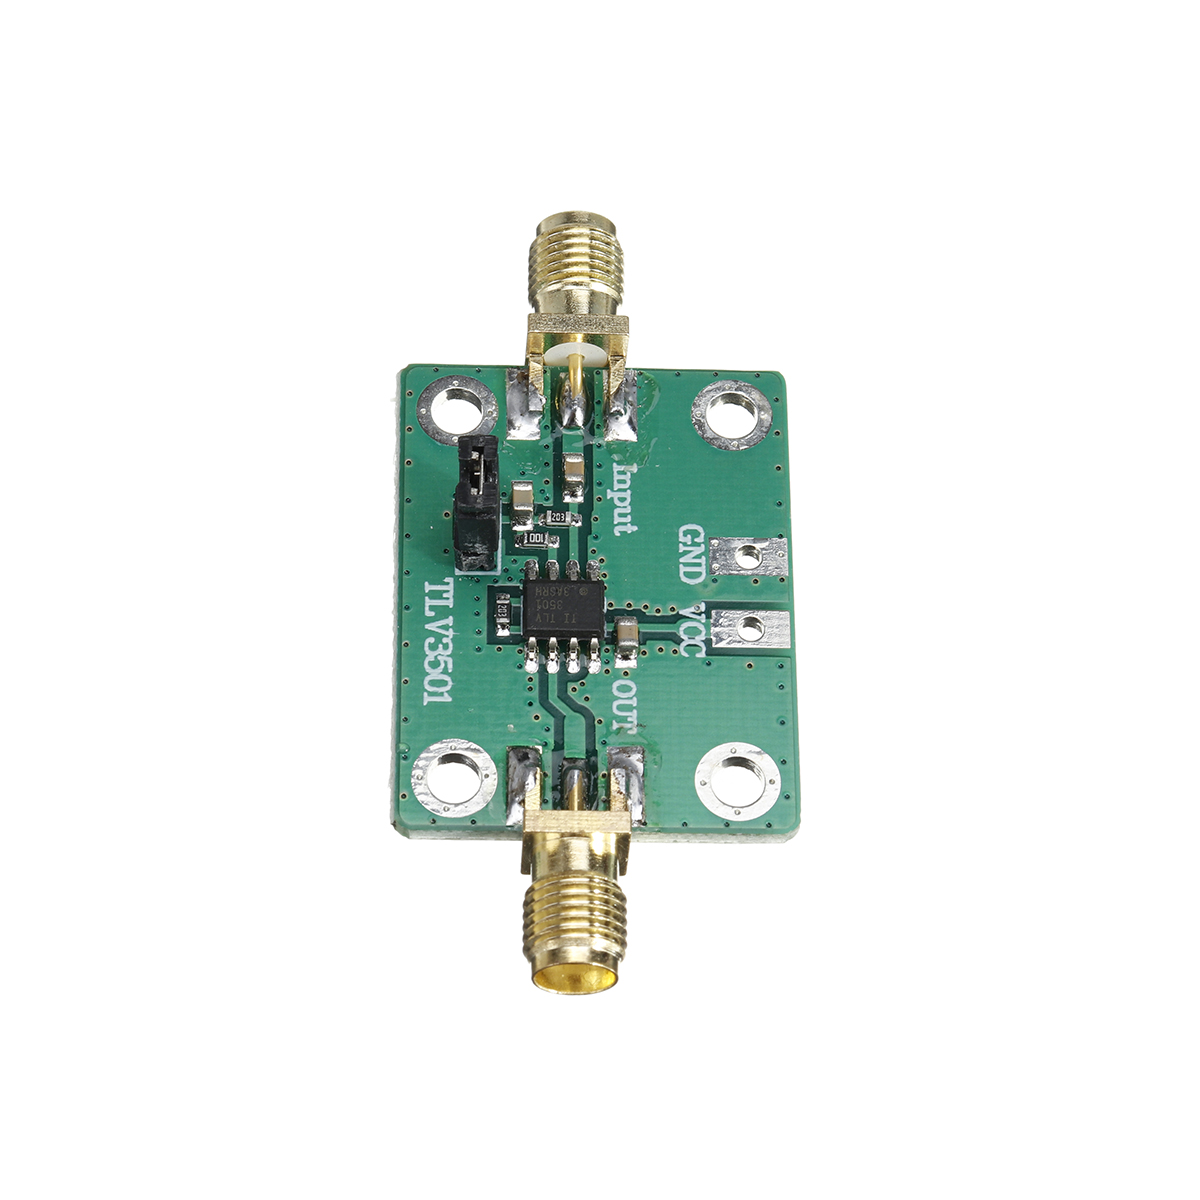 10pcs-TLV3501-High-speed-Waveform-Comparator-Frequency-Meter-Tester-Front-end-Shaping-Module-1689248